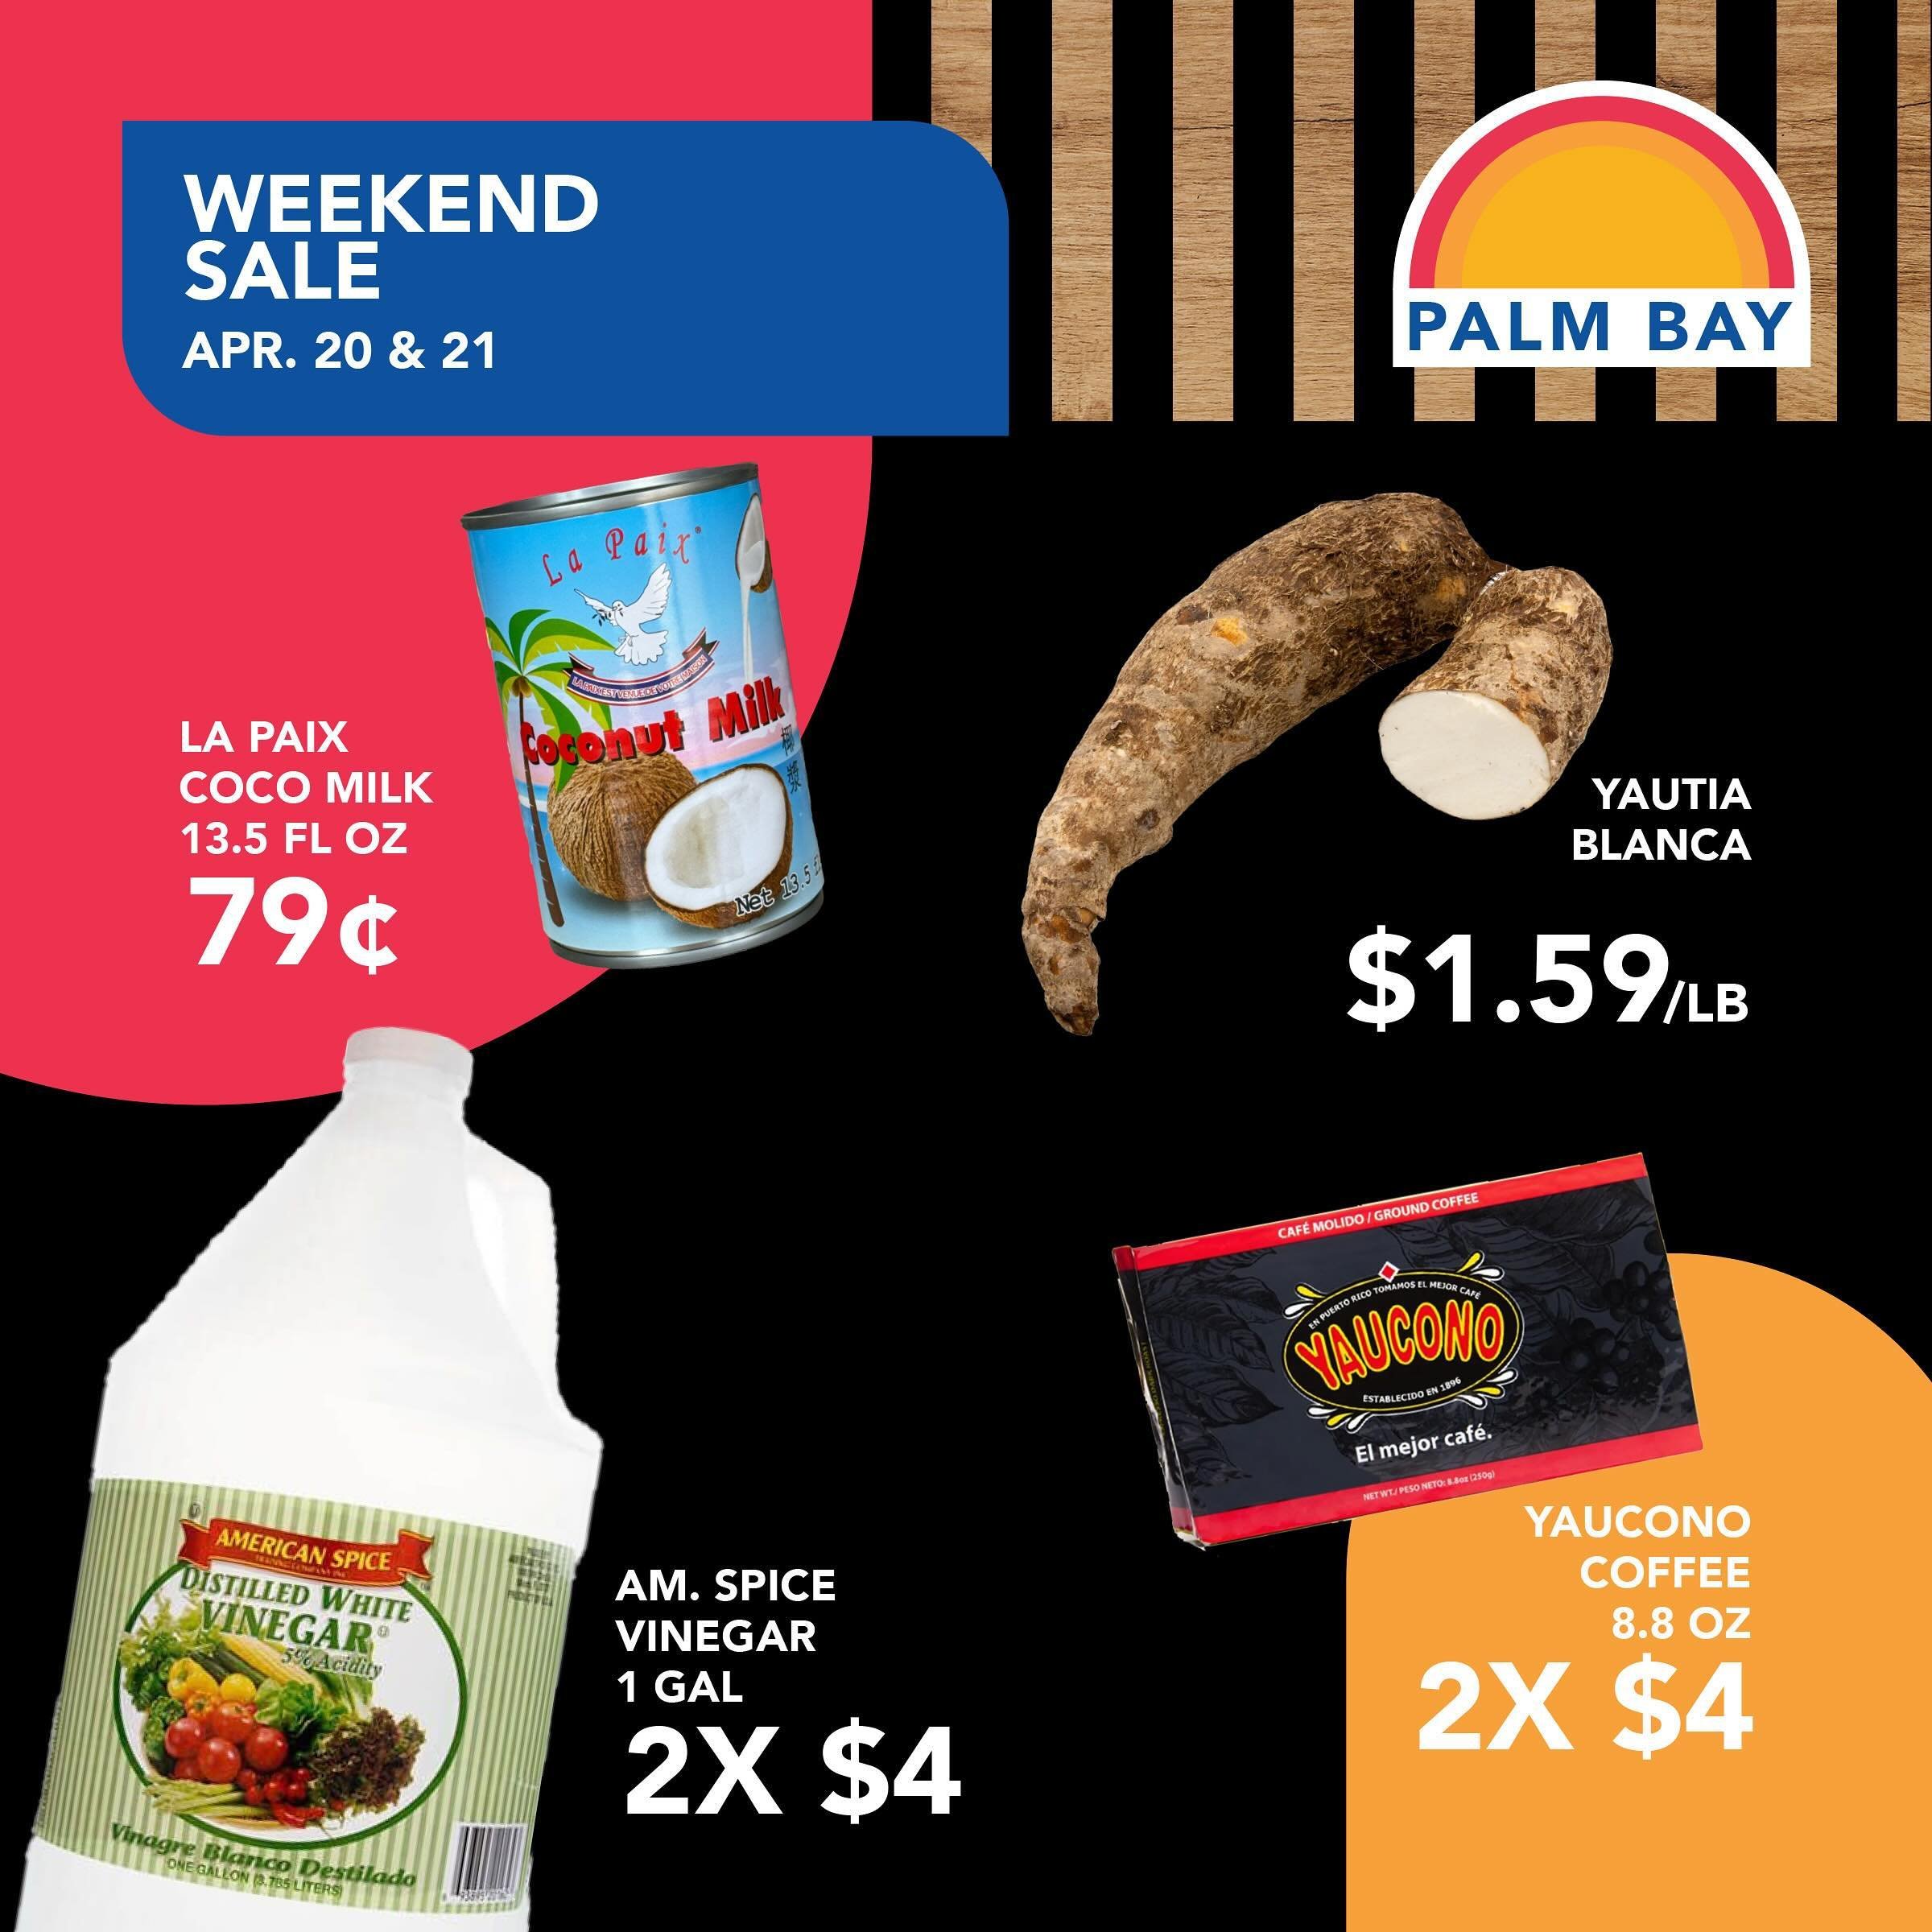 AMAZING
WEEKEND SALES
Here are some amazing deals for this weekend.

Apr. 20th &amp; 21st

🛒🛒🛒🛒🛒🛒🛒

INCRE&Iacute;BLE VENTAS
DE FIN DE SEMANA
Aqu&iacute; hay algunas ofertas incre&iacute;bles para este fin de semana.

Abr. 20 &amp; 21

&mdash;&